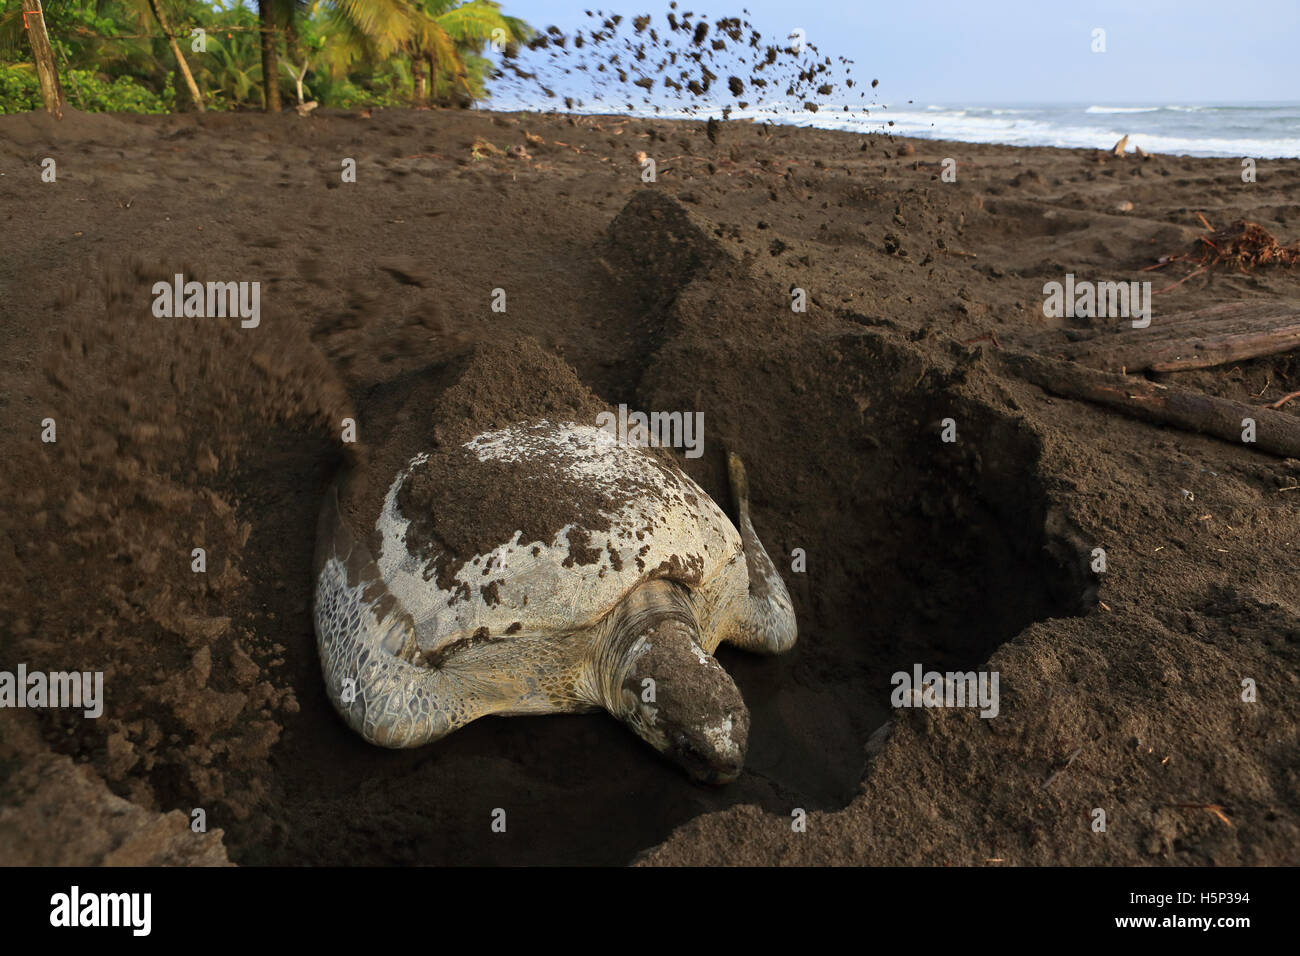 Female green turtle (Chelonia mydas) burying her nest early in the morning on the beach in Tortuguero National Park, Costa Rica. Stock Photo